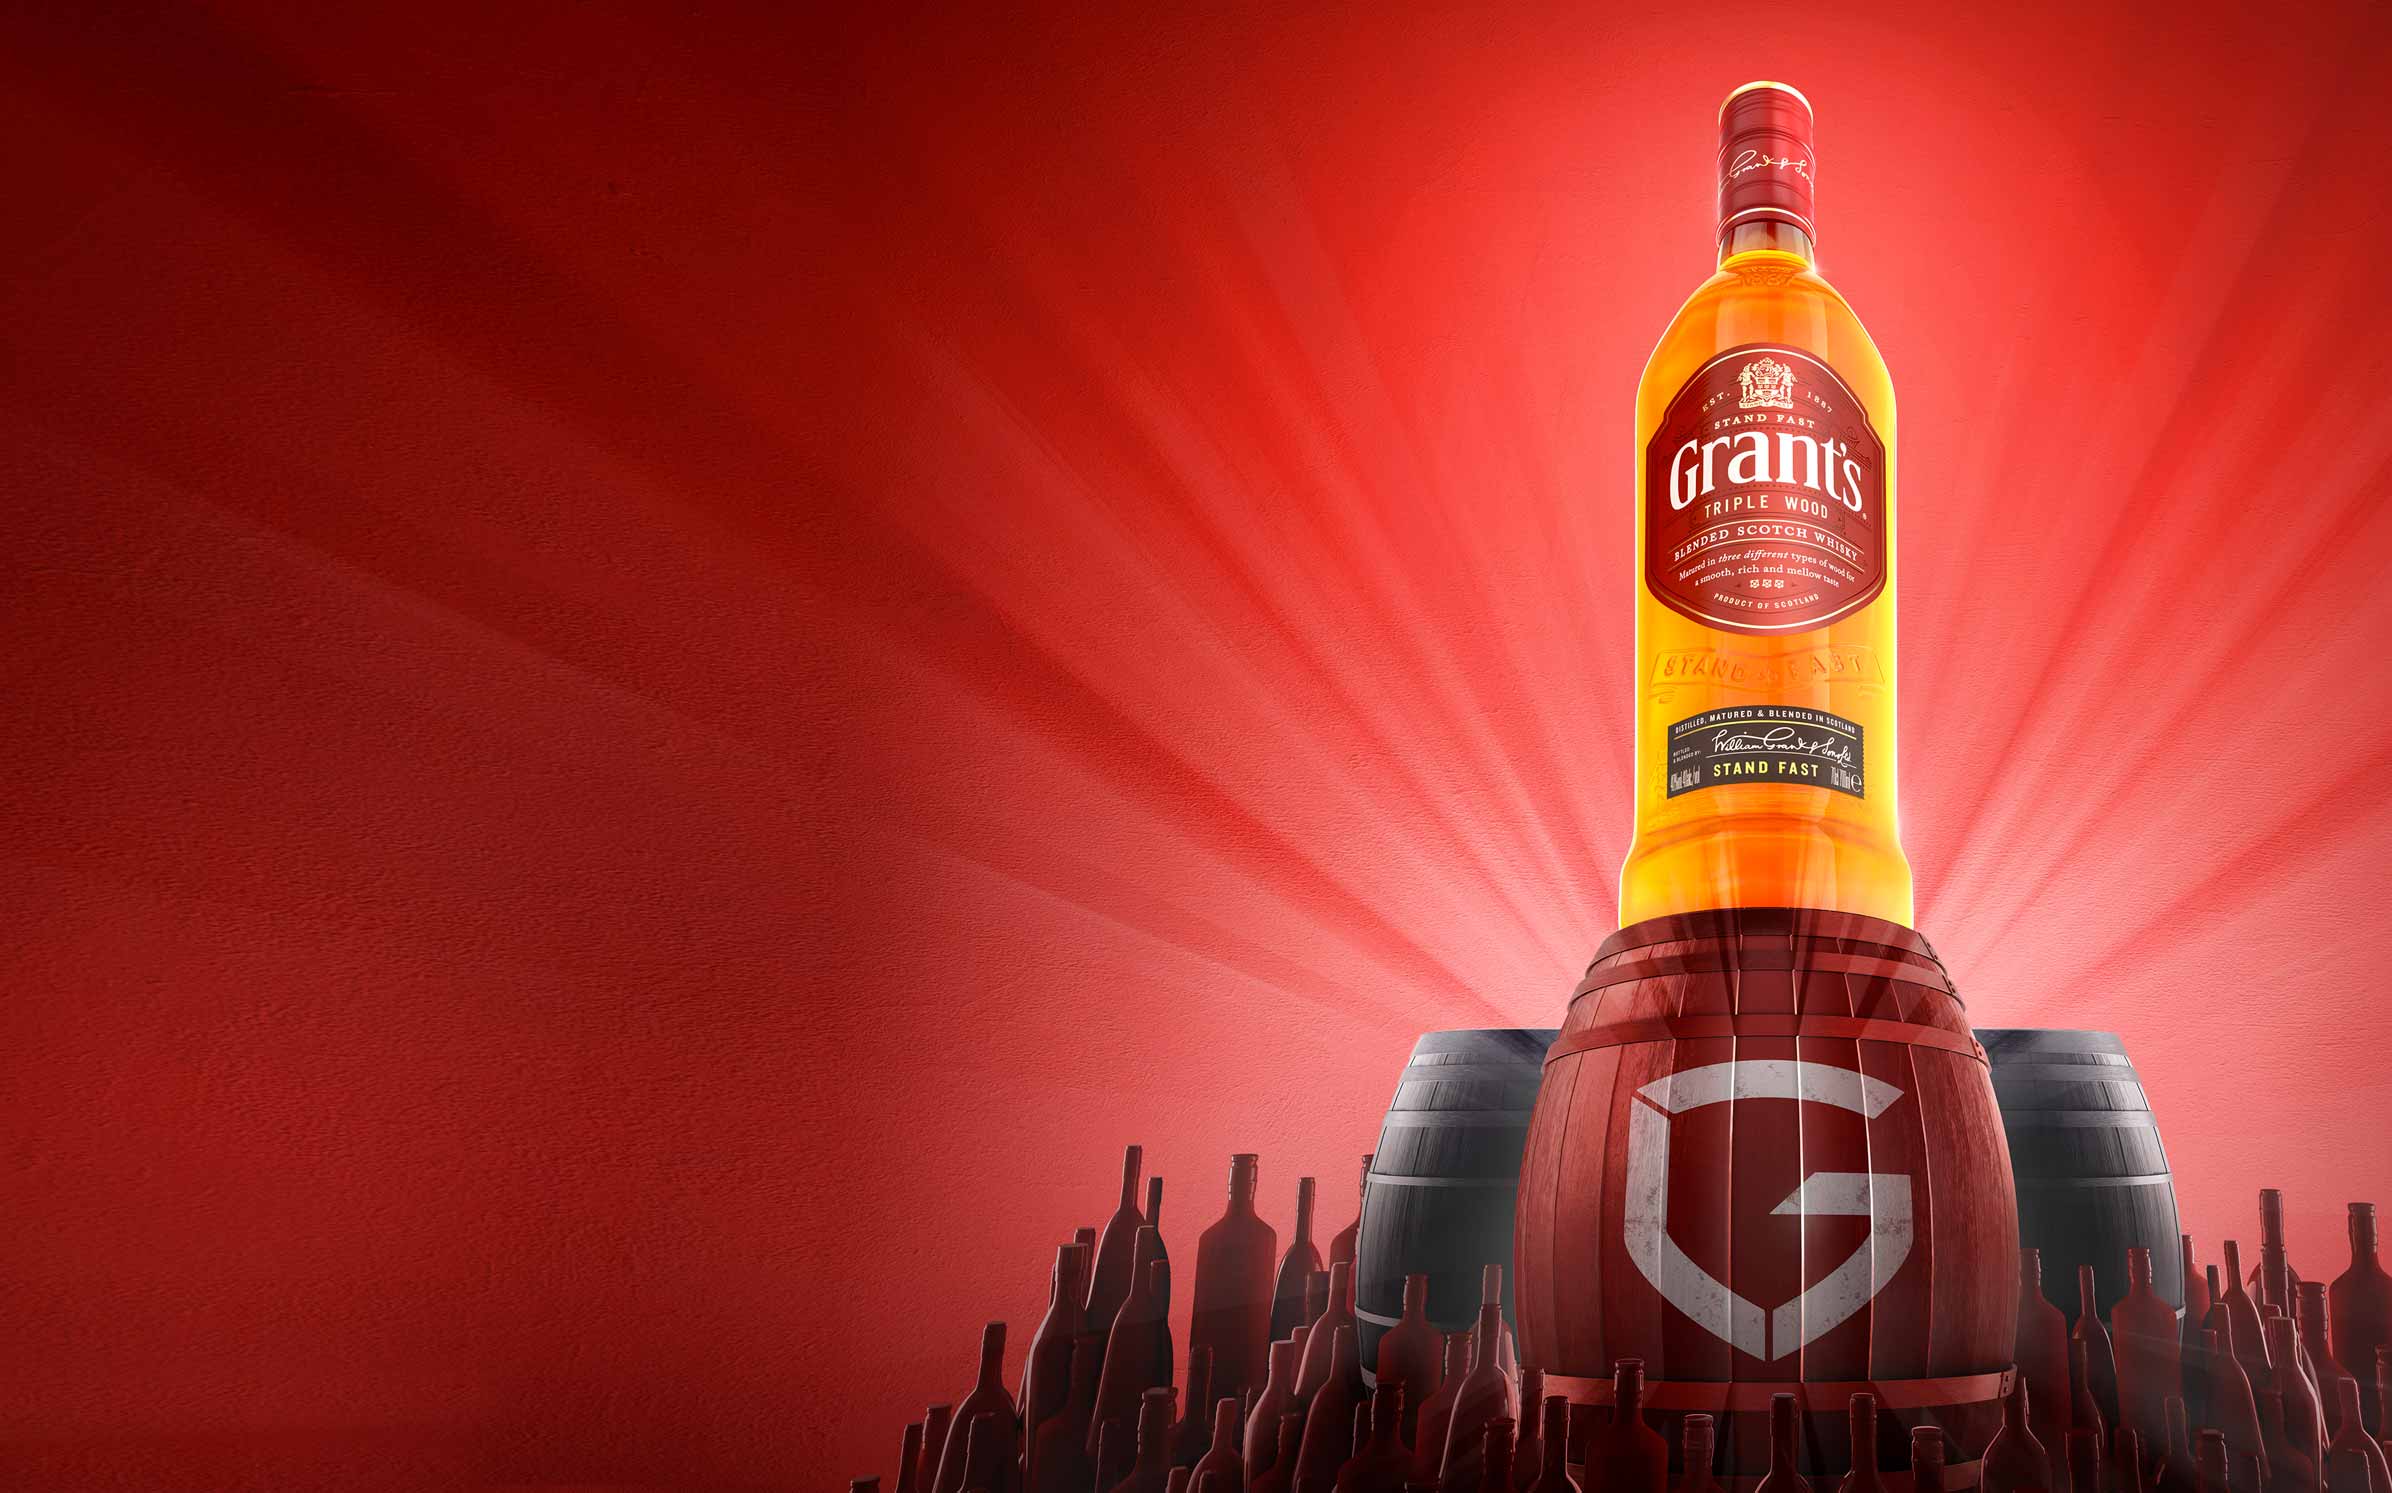 Grant's triple wood whisky bottle on barrel with red background